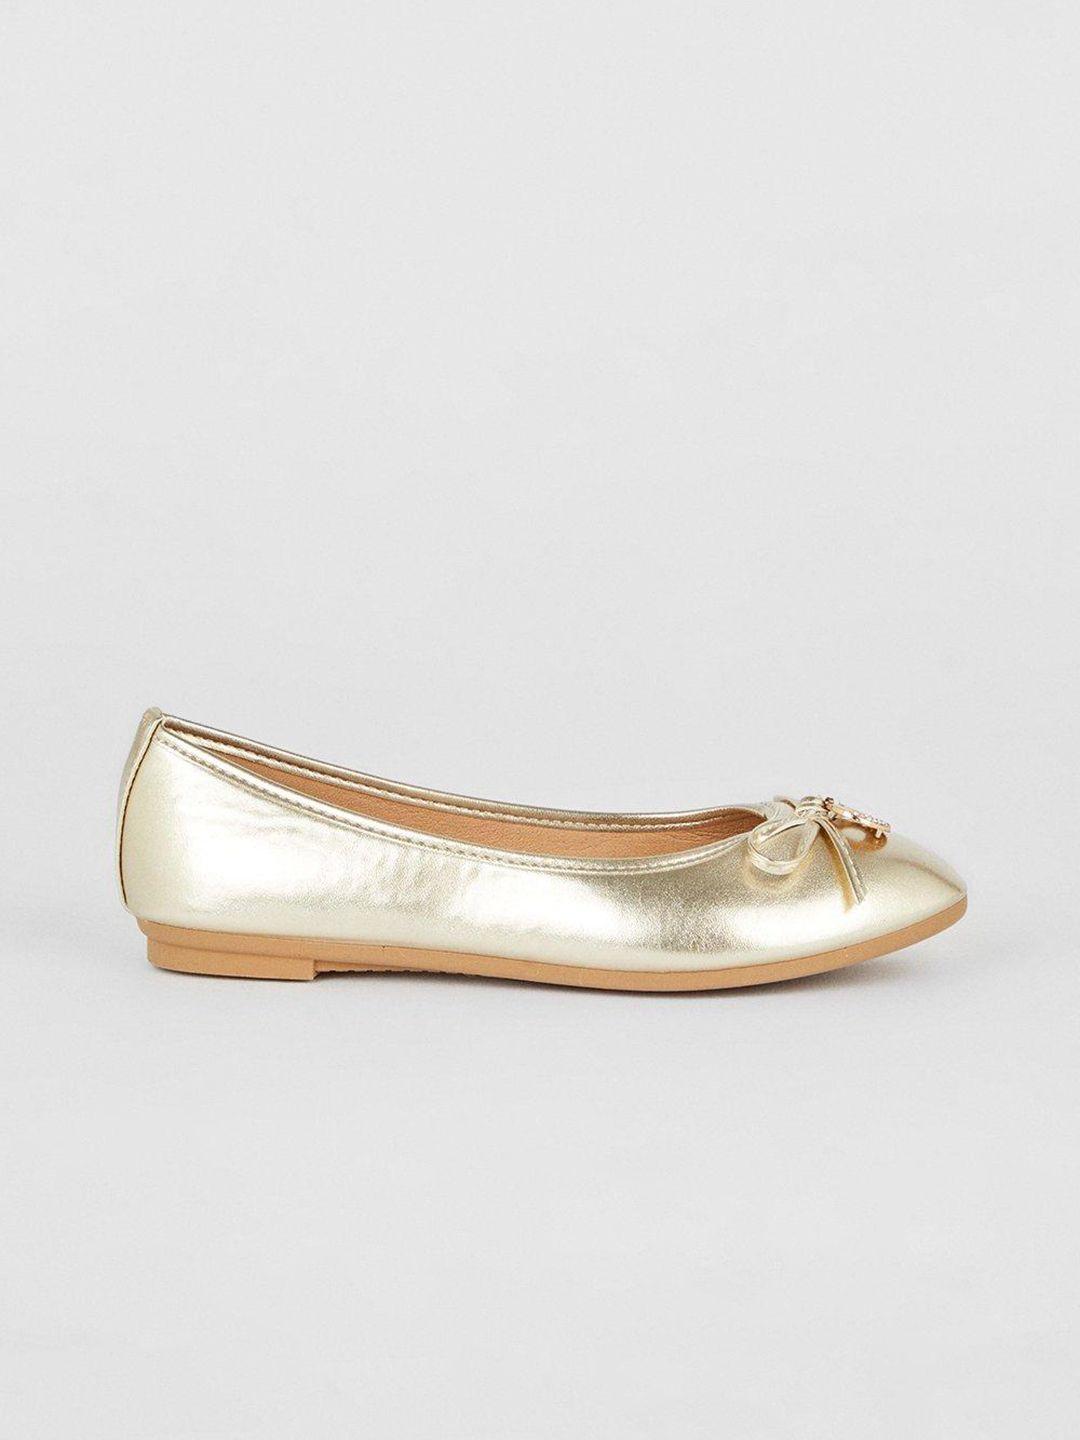 dorothy perkins women ballerinas with bows detail